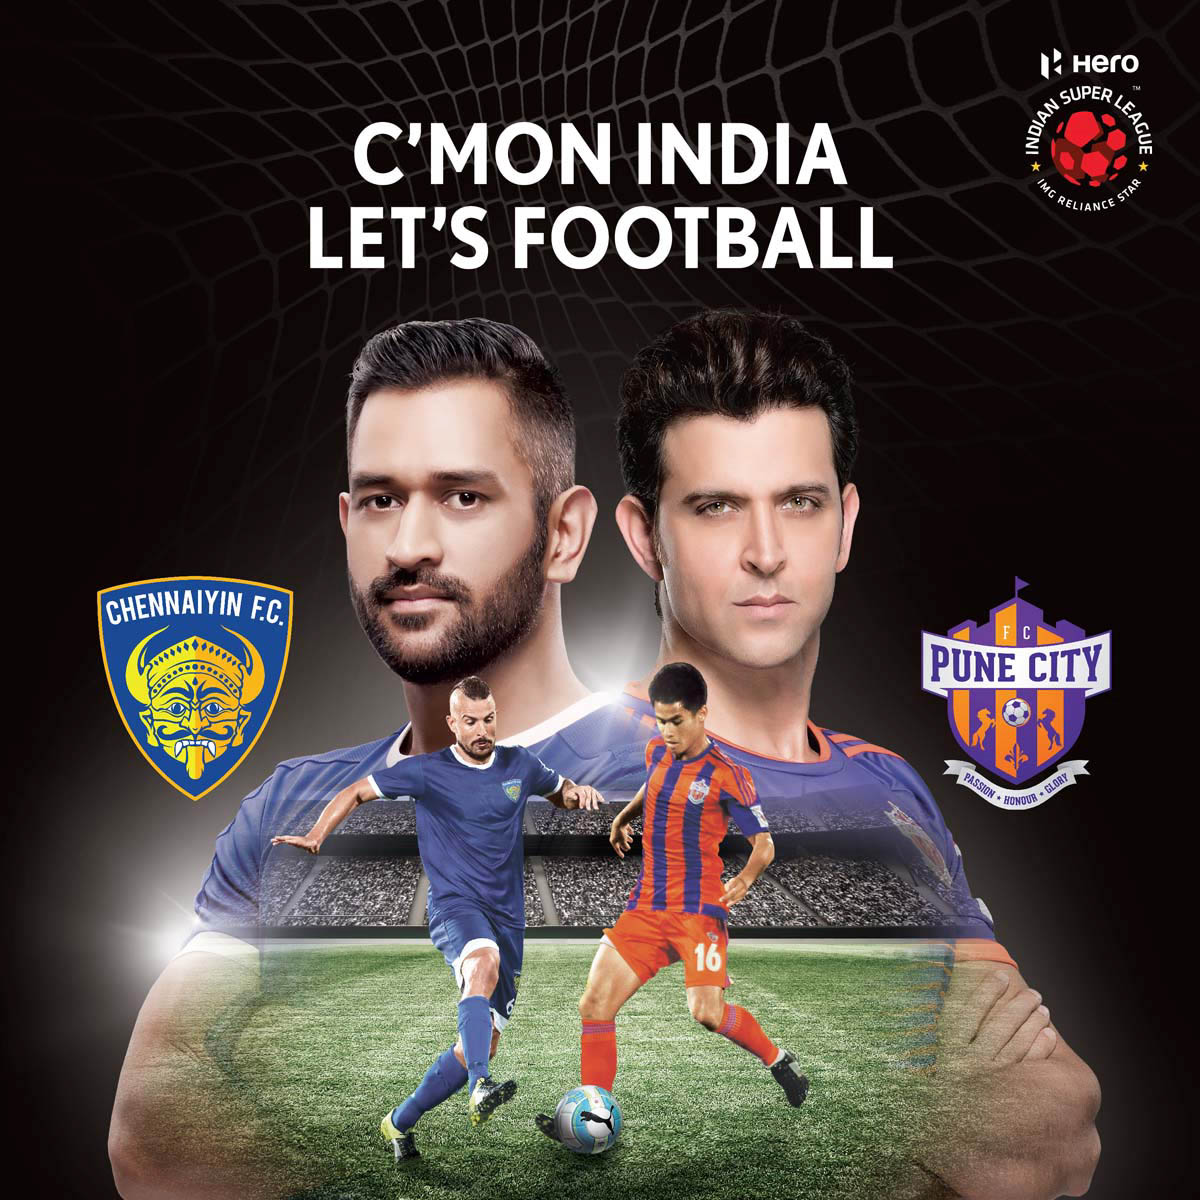 Indian Super League, Football League,Sport Photography, Crickerter Photoshoot, Shooting with Celebrity, Sport Photographer, Passionate, Commissioned Photography, Best Advertising Photographer by Vikram Bawa, Mumbai, India